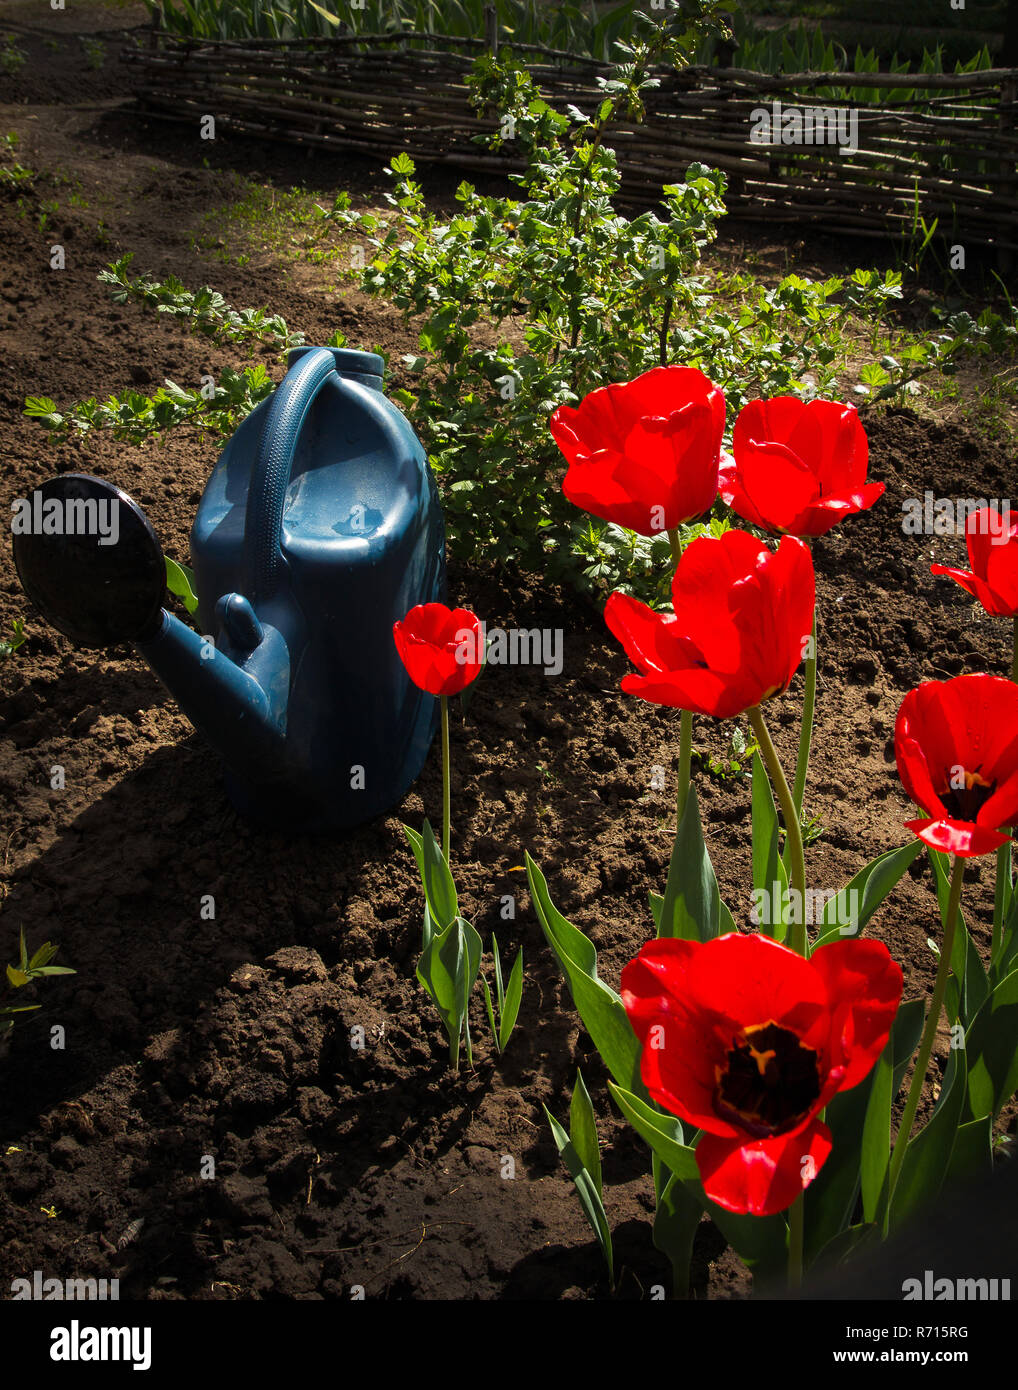 Blooming red tulips and a watering can Stock Photo